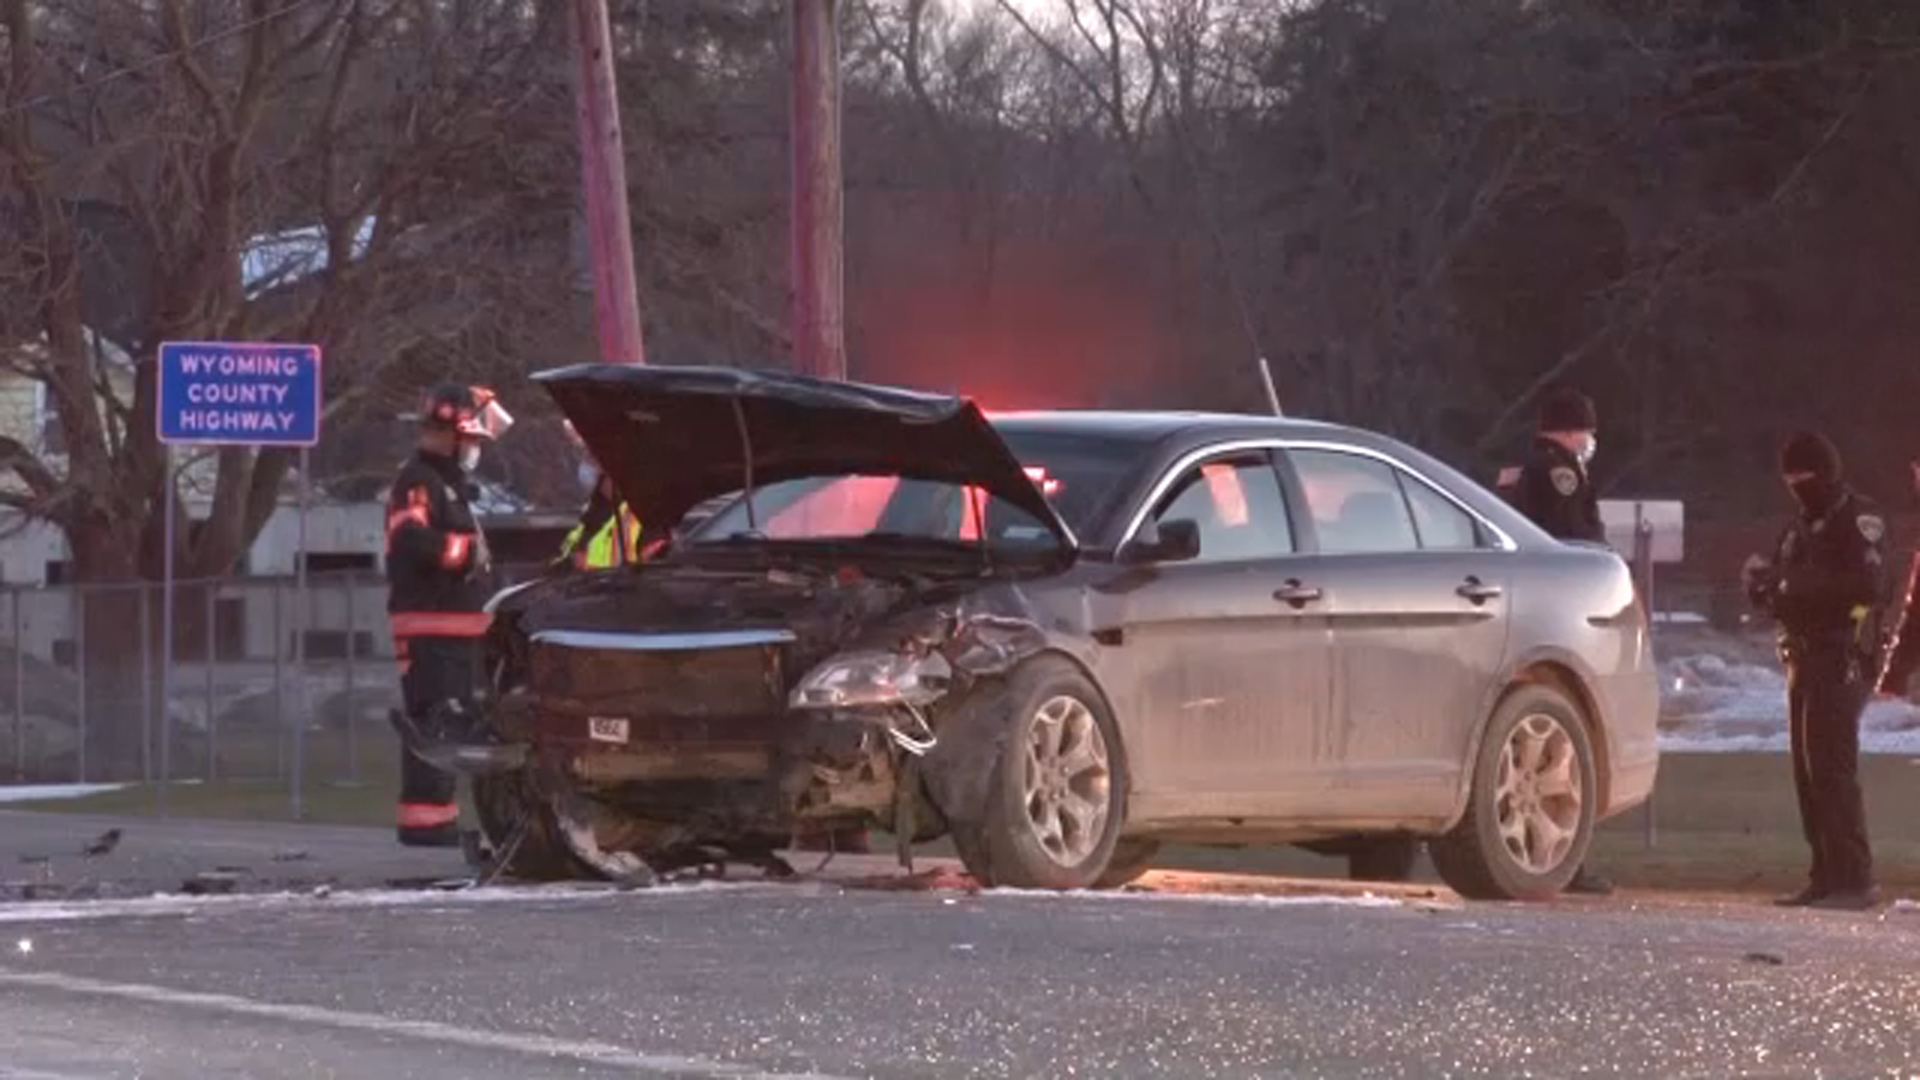 Police Identify 2 Women Killed in Crash on Route 19